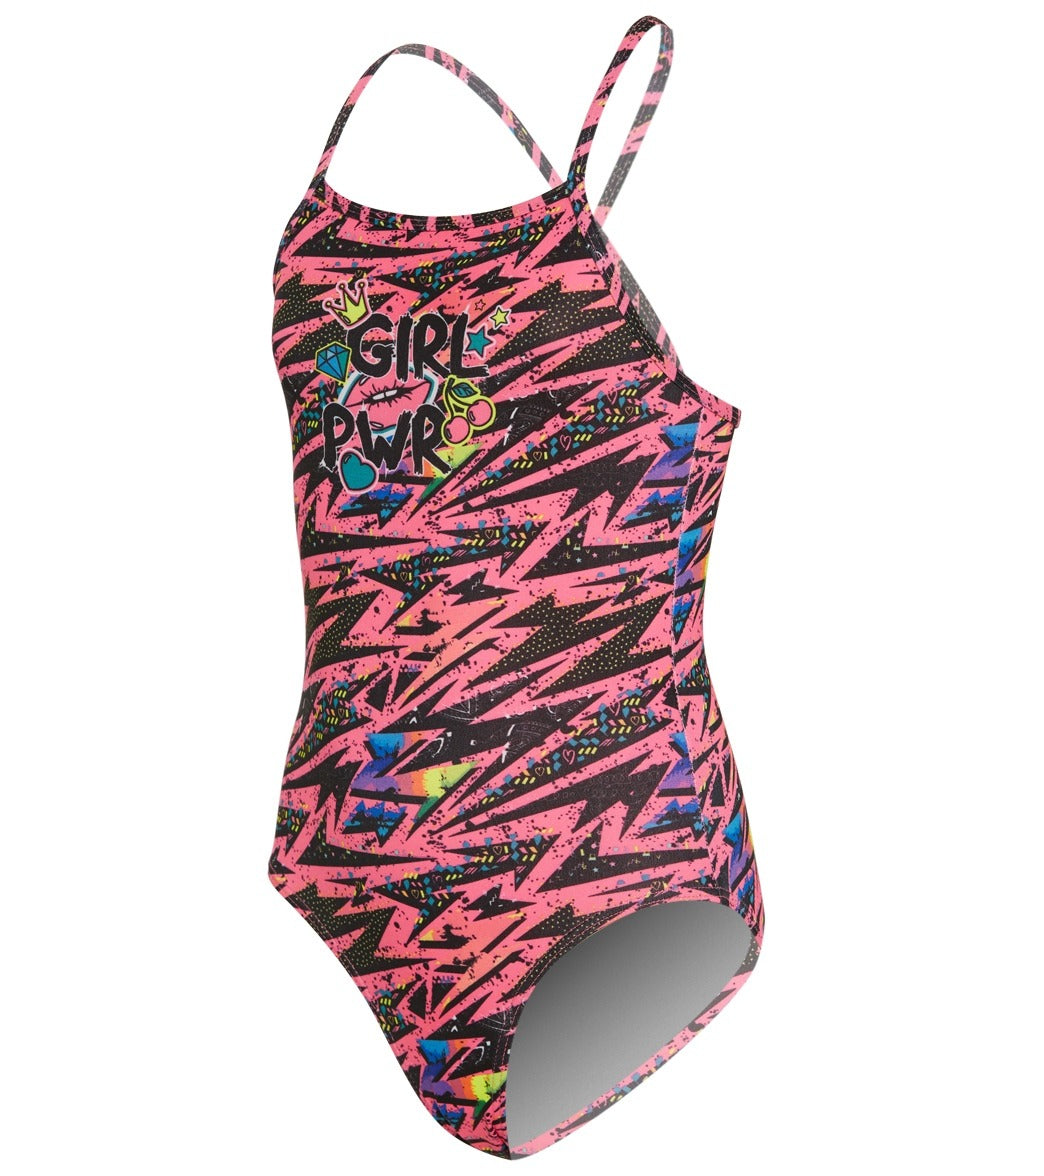 Amanzi Toddler Girls' Girl Power One Piece Swimsuit at SwimOutlet.com